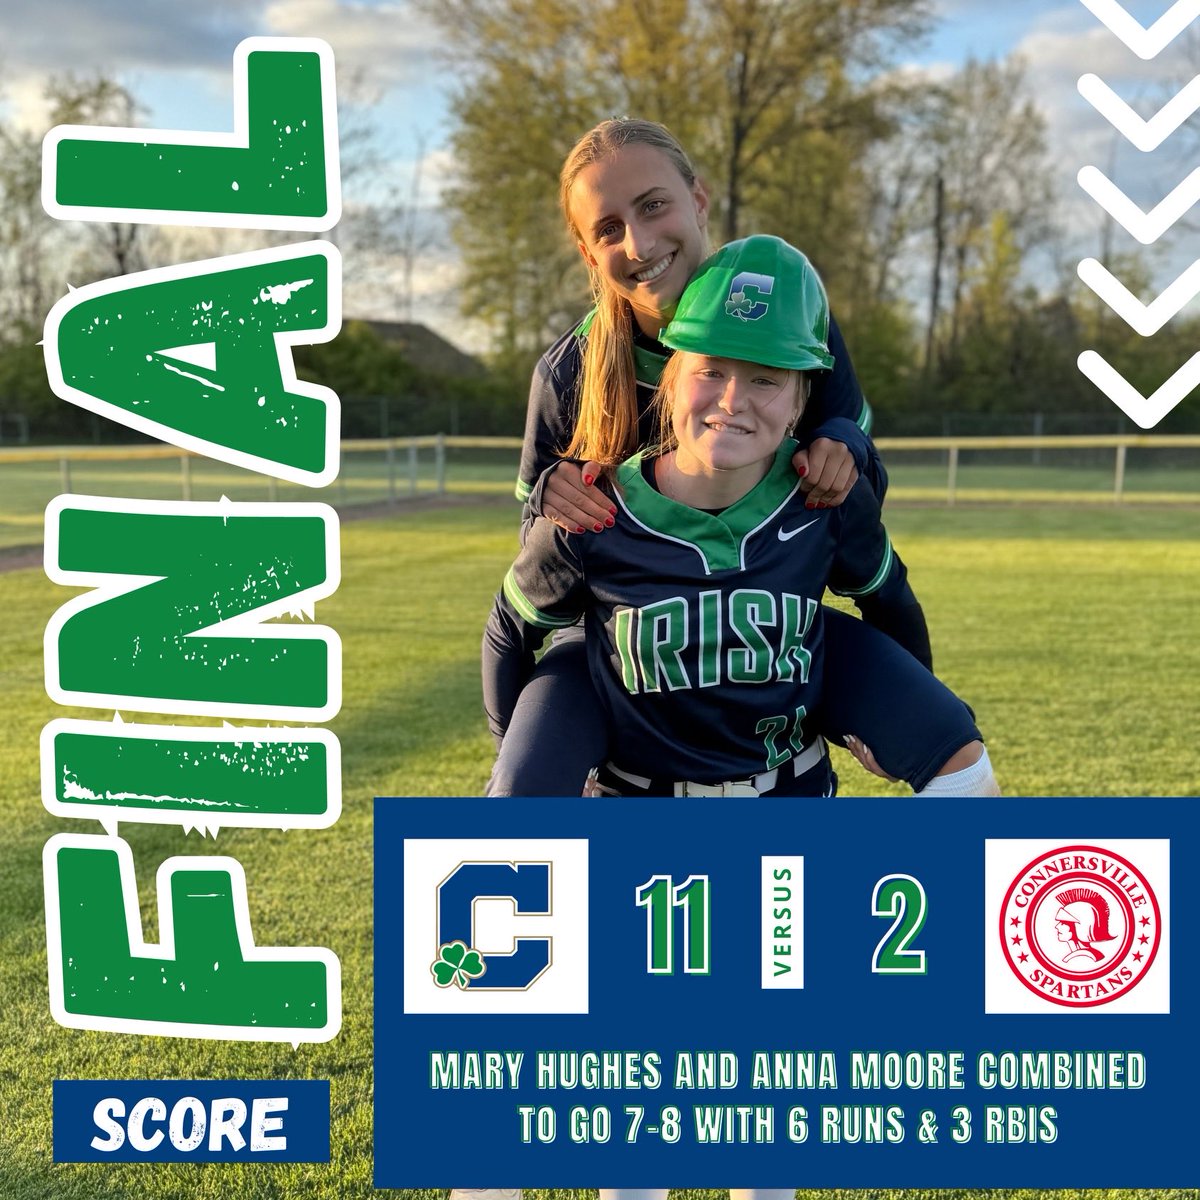 Great 1-2 punch for the Irish as ⁦@anna_moore_06⁩ & ⁦@mar_yhughes⁩ combine for 6 runs & 7 hits. ⁦@_angela3_3⁩ drove in 2 runs w/ a triple. Notable Milestone: ⁦@sidneyfeczko⁩ registers her 100th K of the season☘️